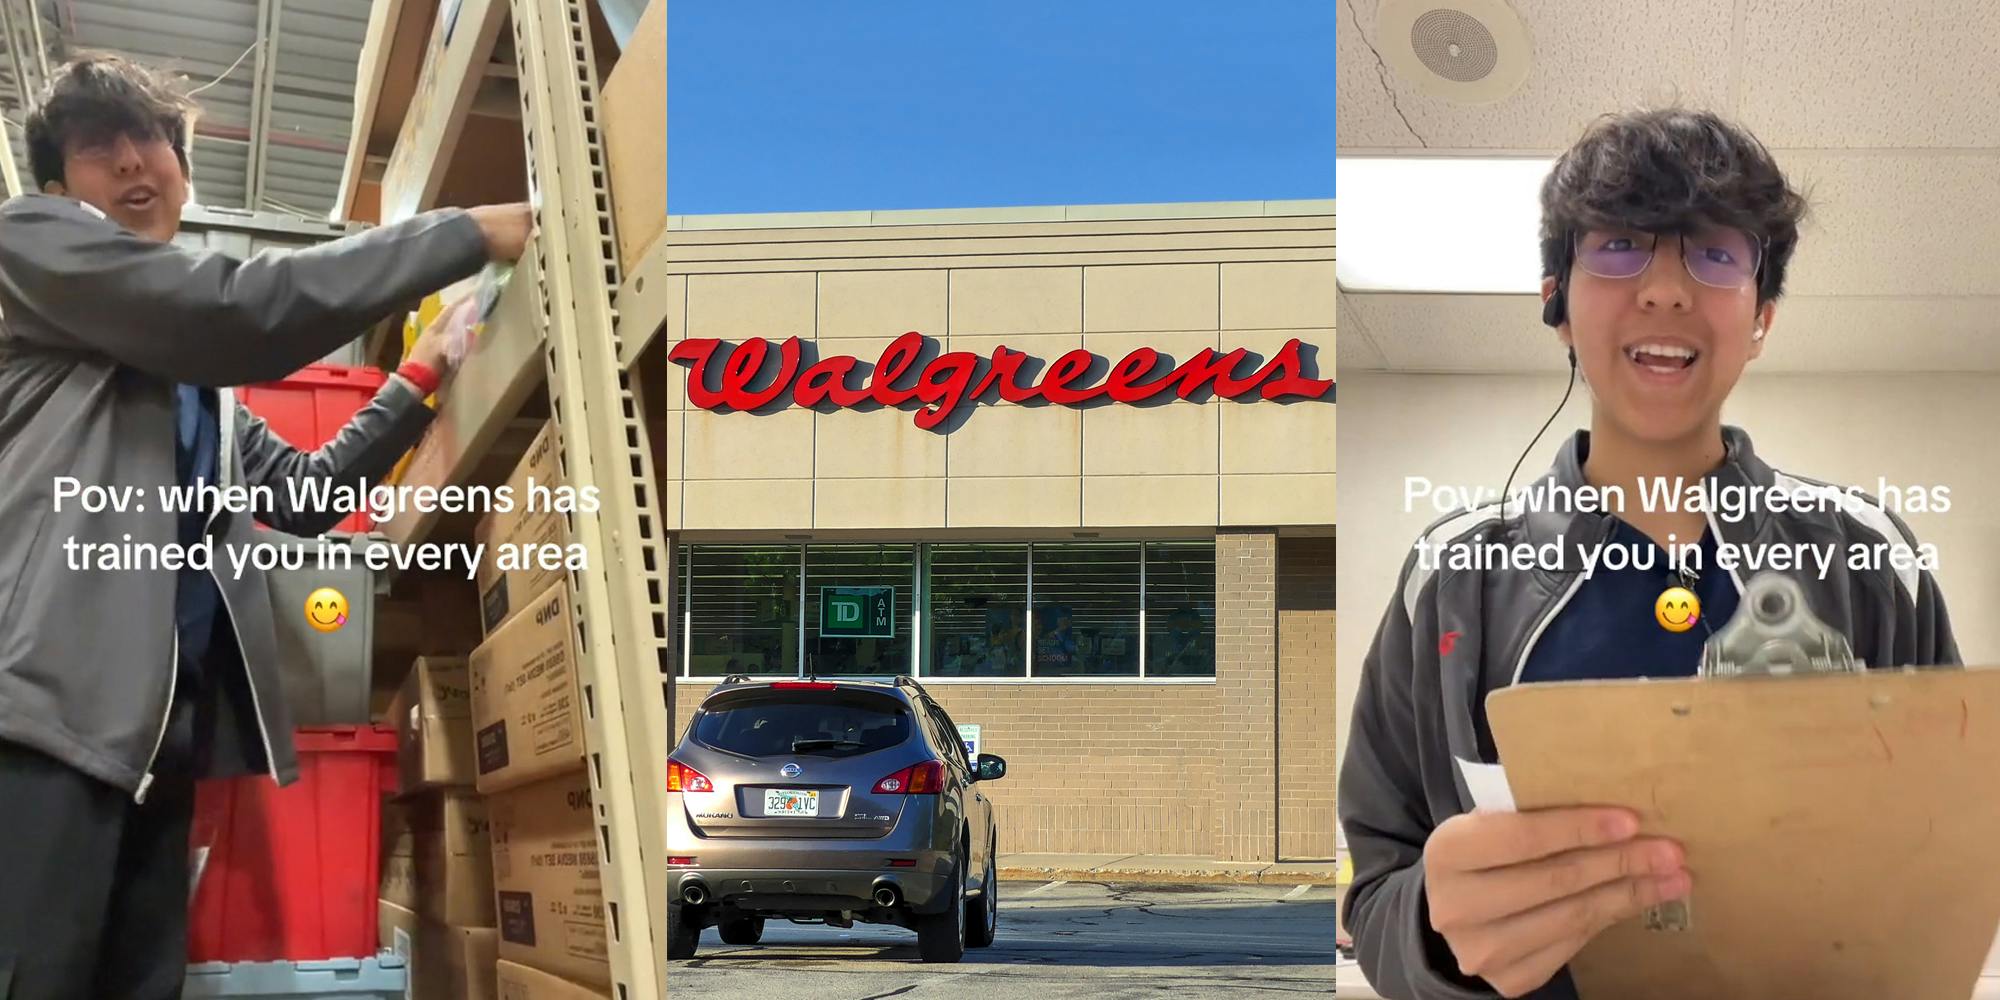 Walgreens employee with caption "Pov: when Walgreens has trained you in every area" (l) Walgreens building with sign (c) Walgreens employee with caption "Pov: when Walgreens has trained you in every area" (r)